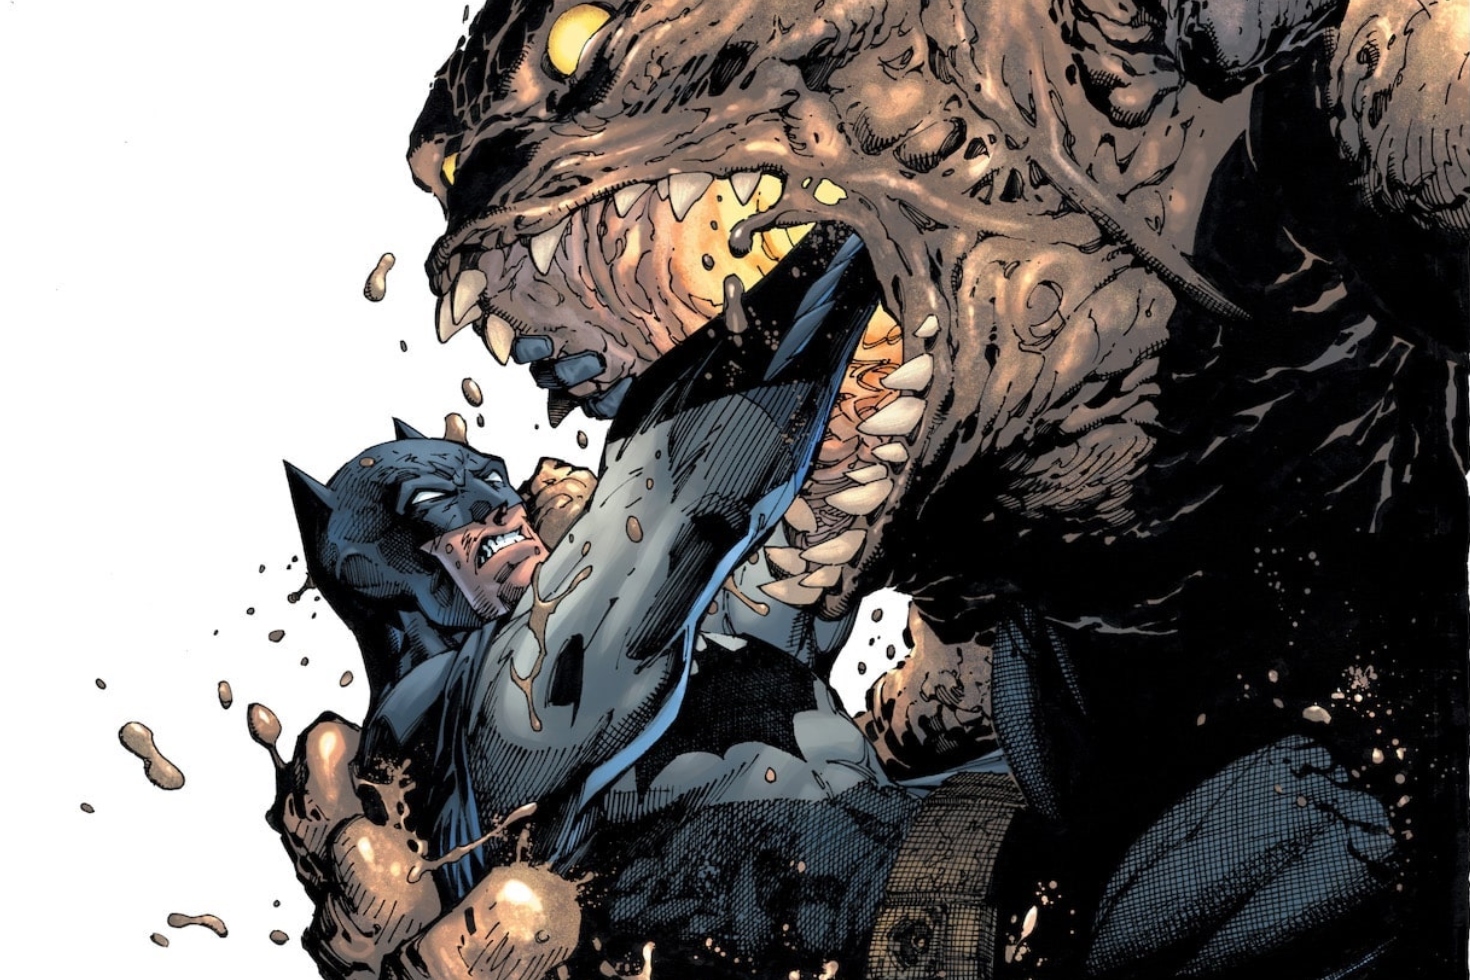 Hollywood horror: Jackson Lanzing and Collin Kelly discuss 'Batman: One Bad Day - Clayface'